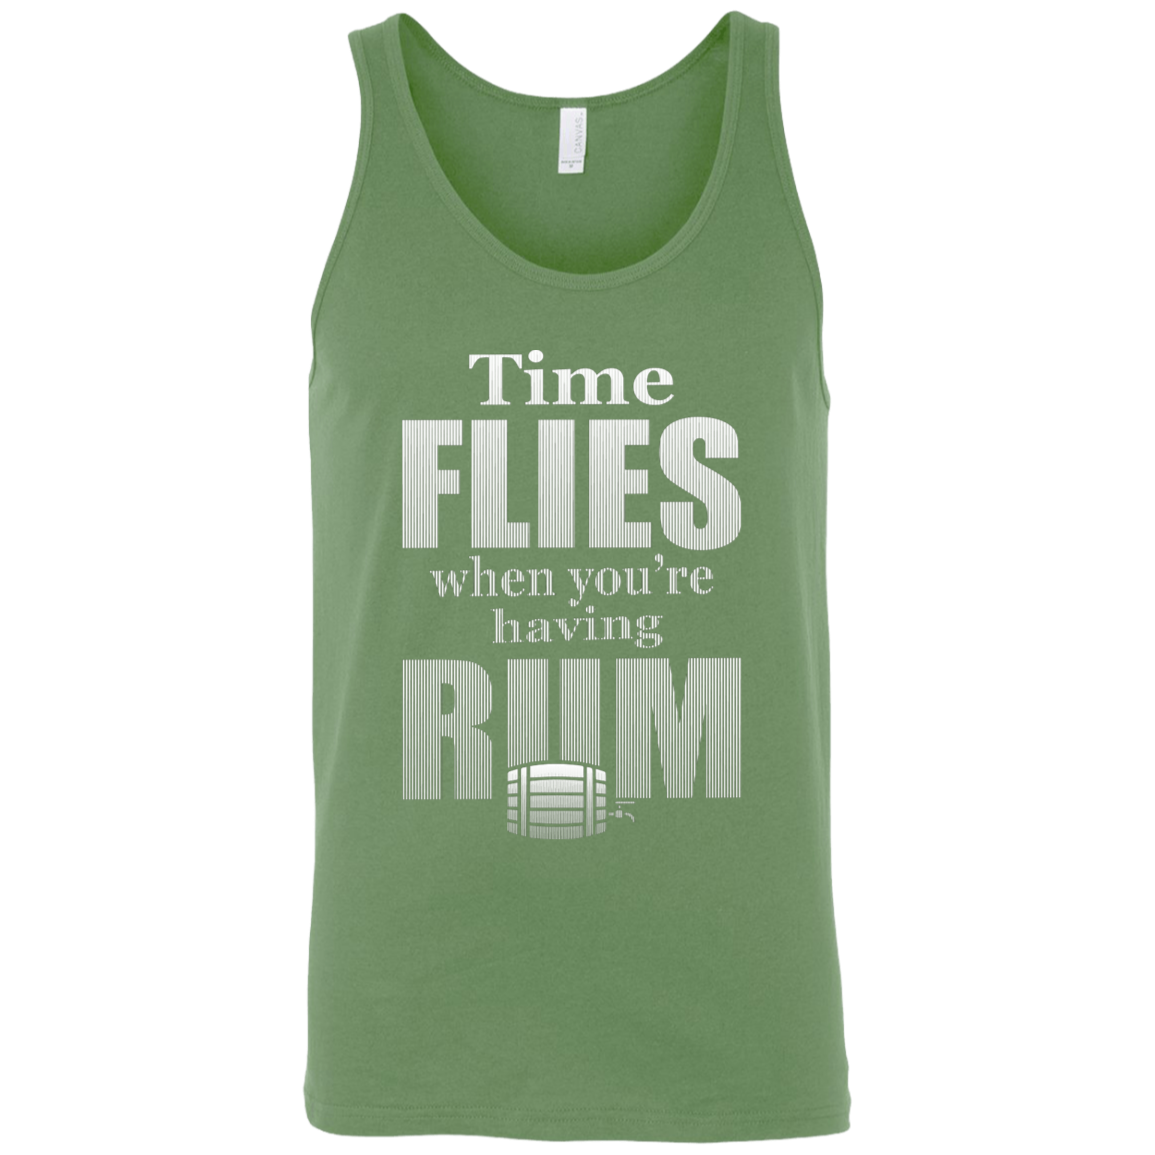 Time Flies When You're Having Rum Tank Top Apparel - The Beer Lodge